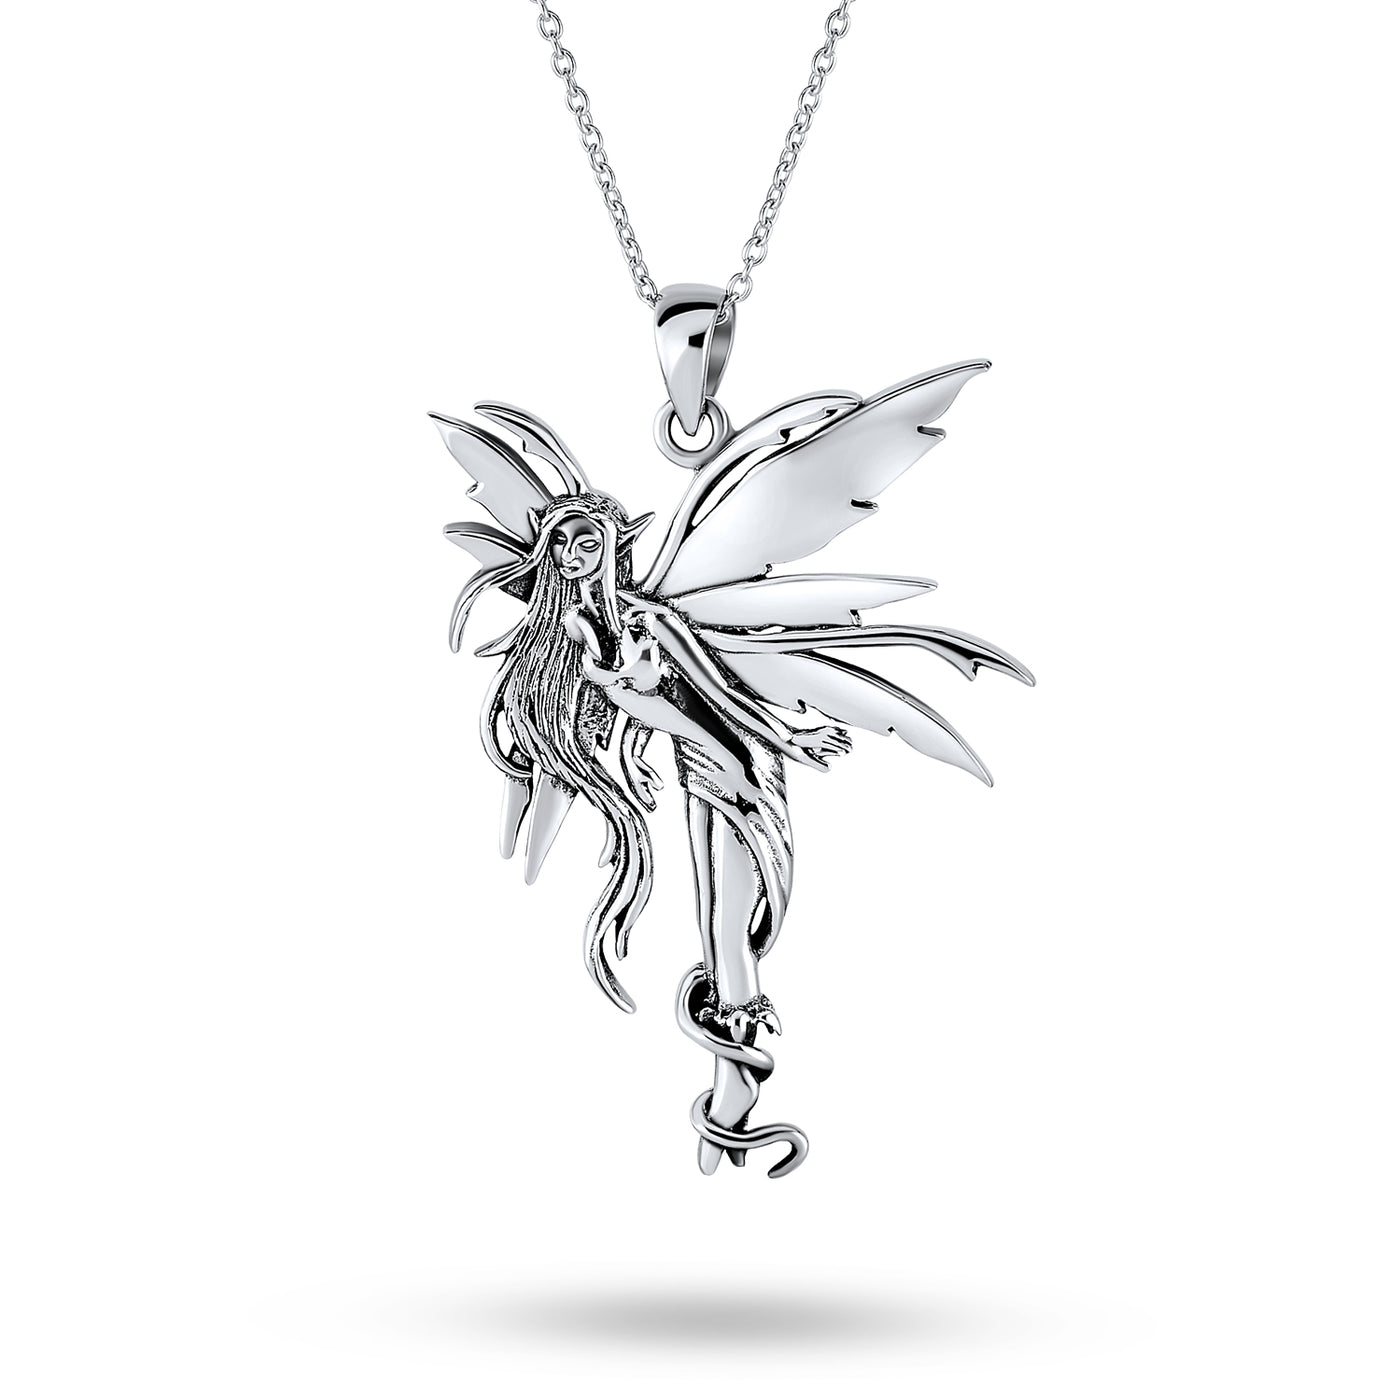 Firefly Fairies Pixie Fairy Angel Necklace Pendant Sterling Silver